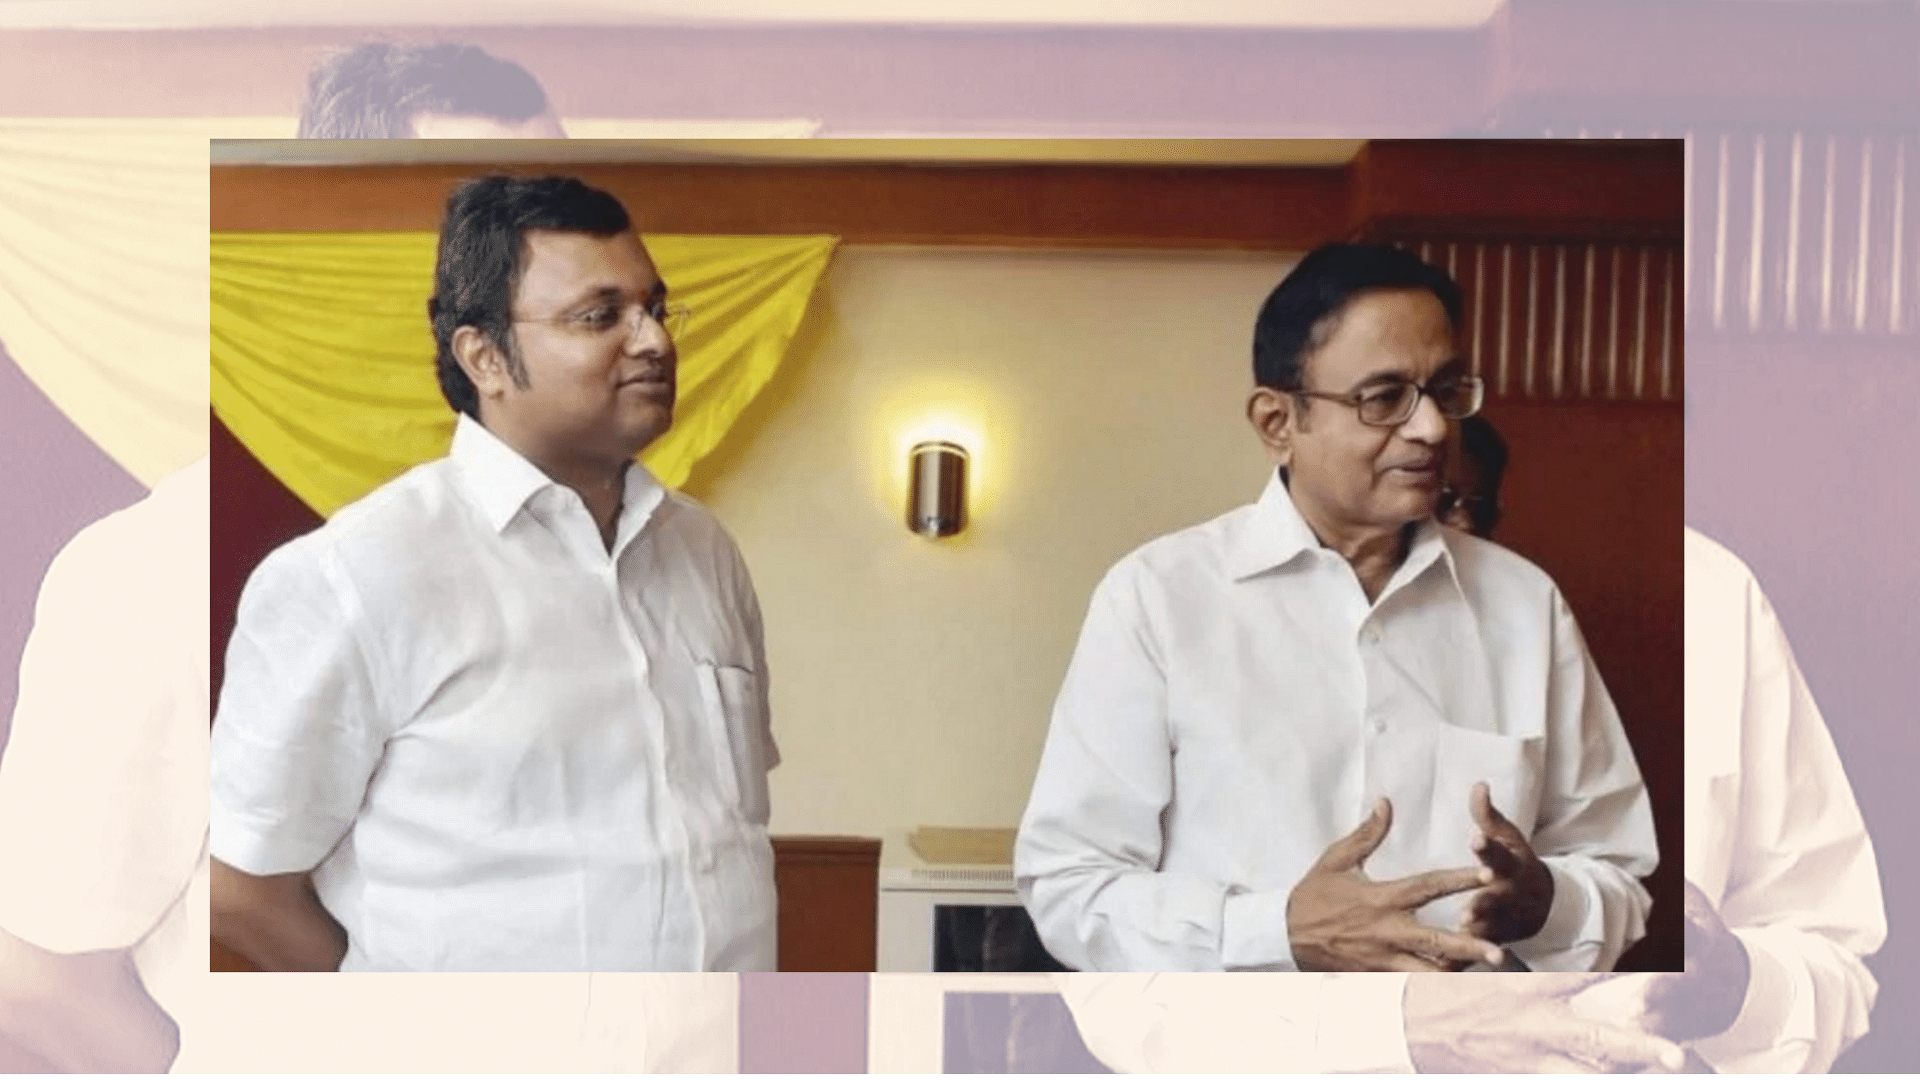 CBI has filed a charge sheet against Chidambaram, Karti and others in the INX media case in Delhi court.